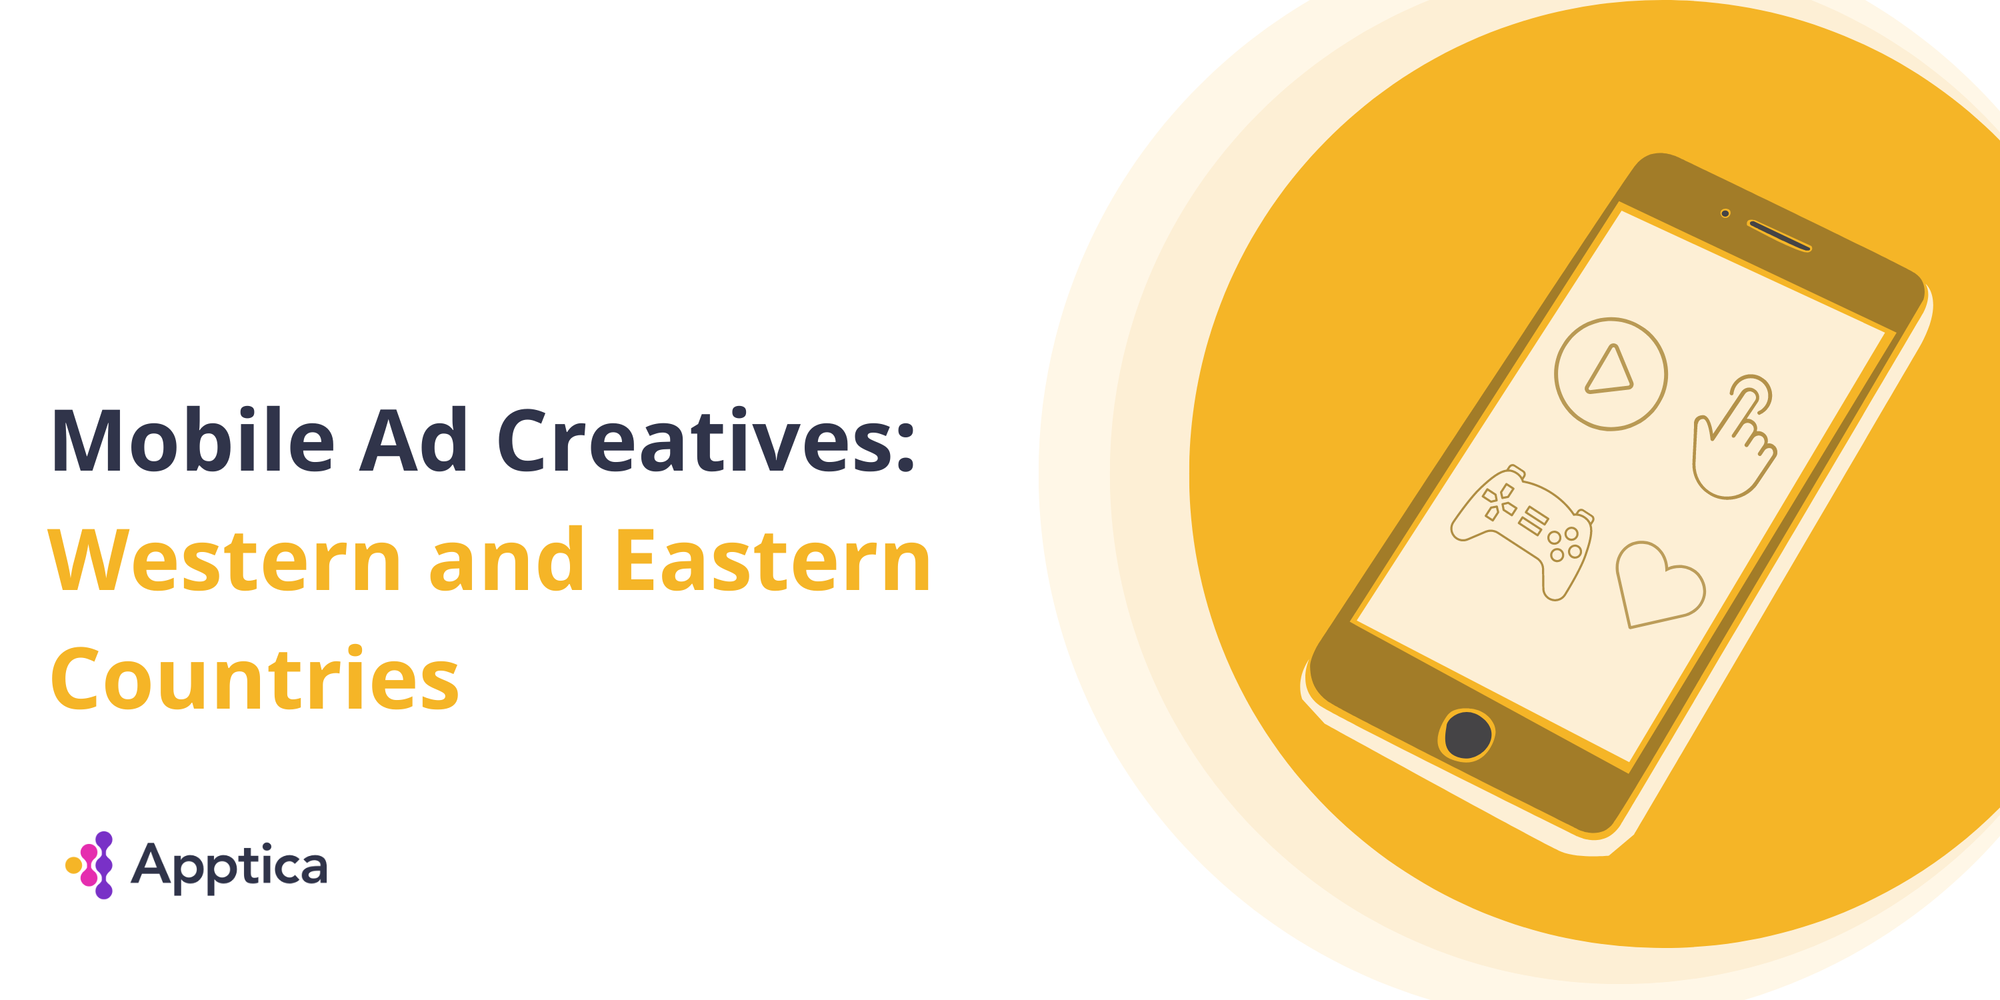 Mobile Video Ad Creatives: Western and Eastern Countries